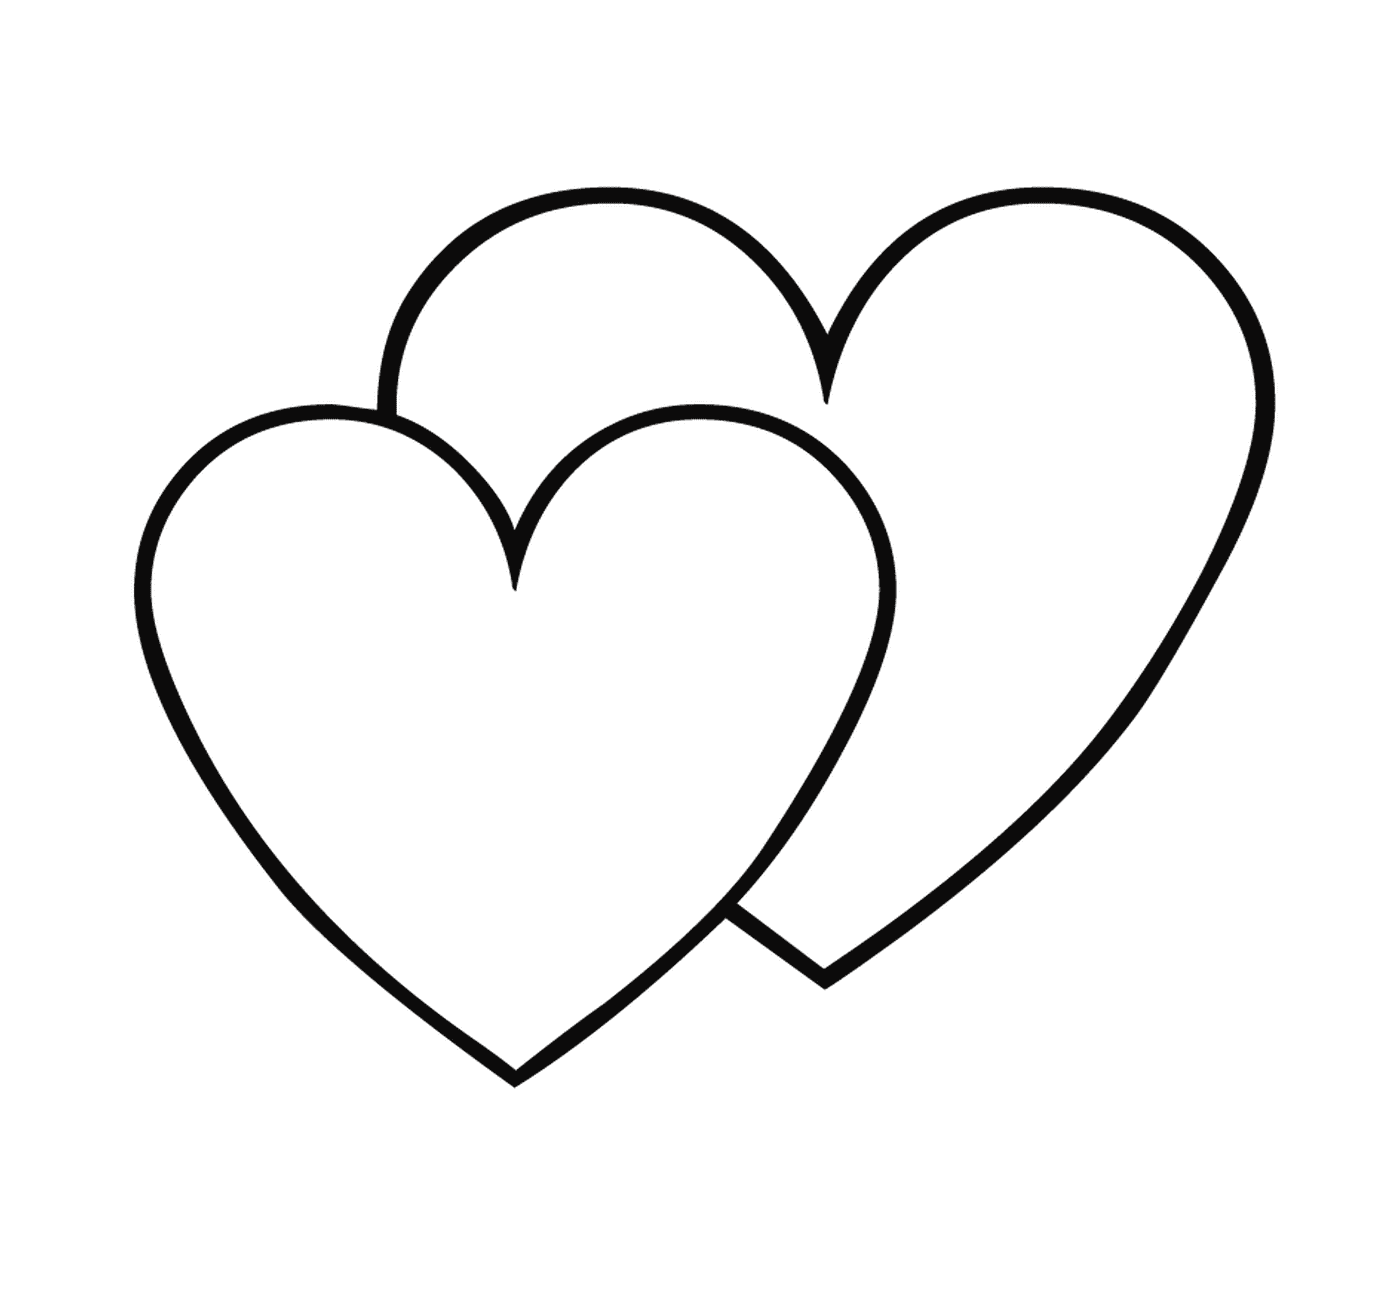  Two black and white hearts on a white background 